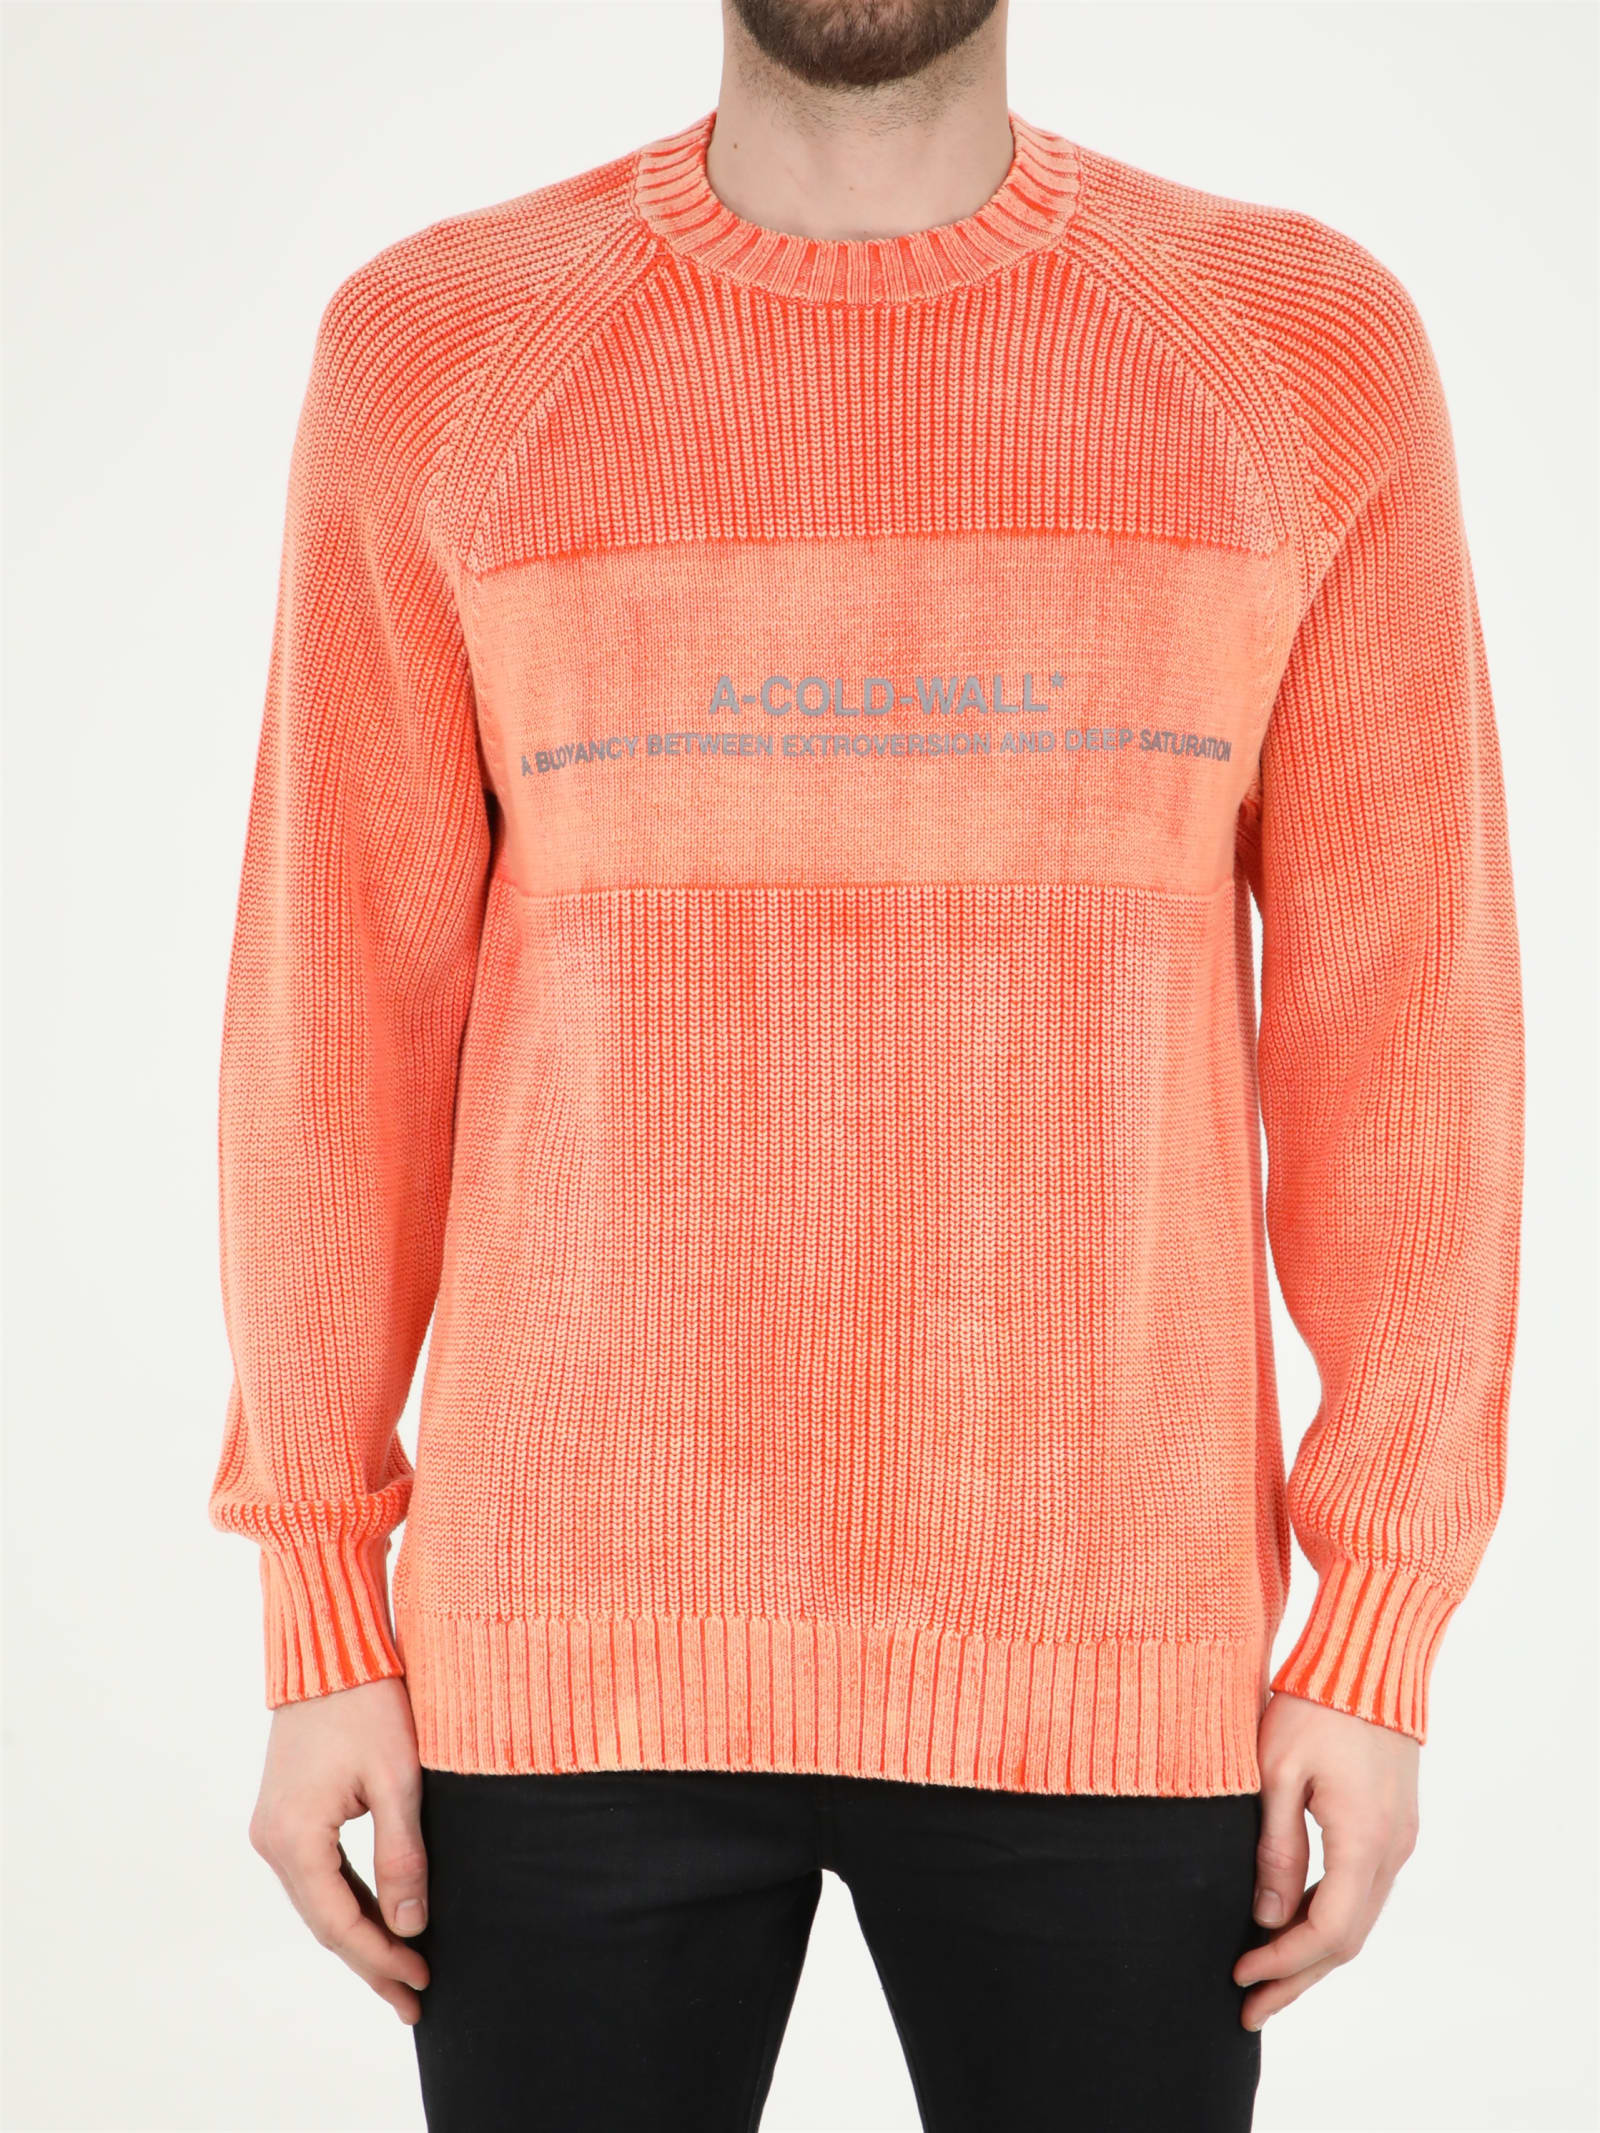 A-COLD-WALL Orange Sweater With Logo